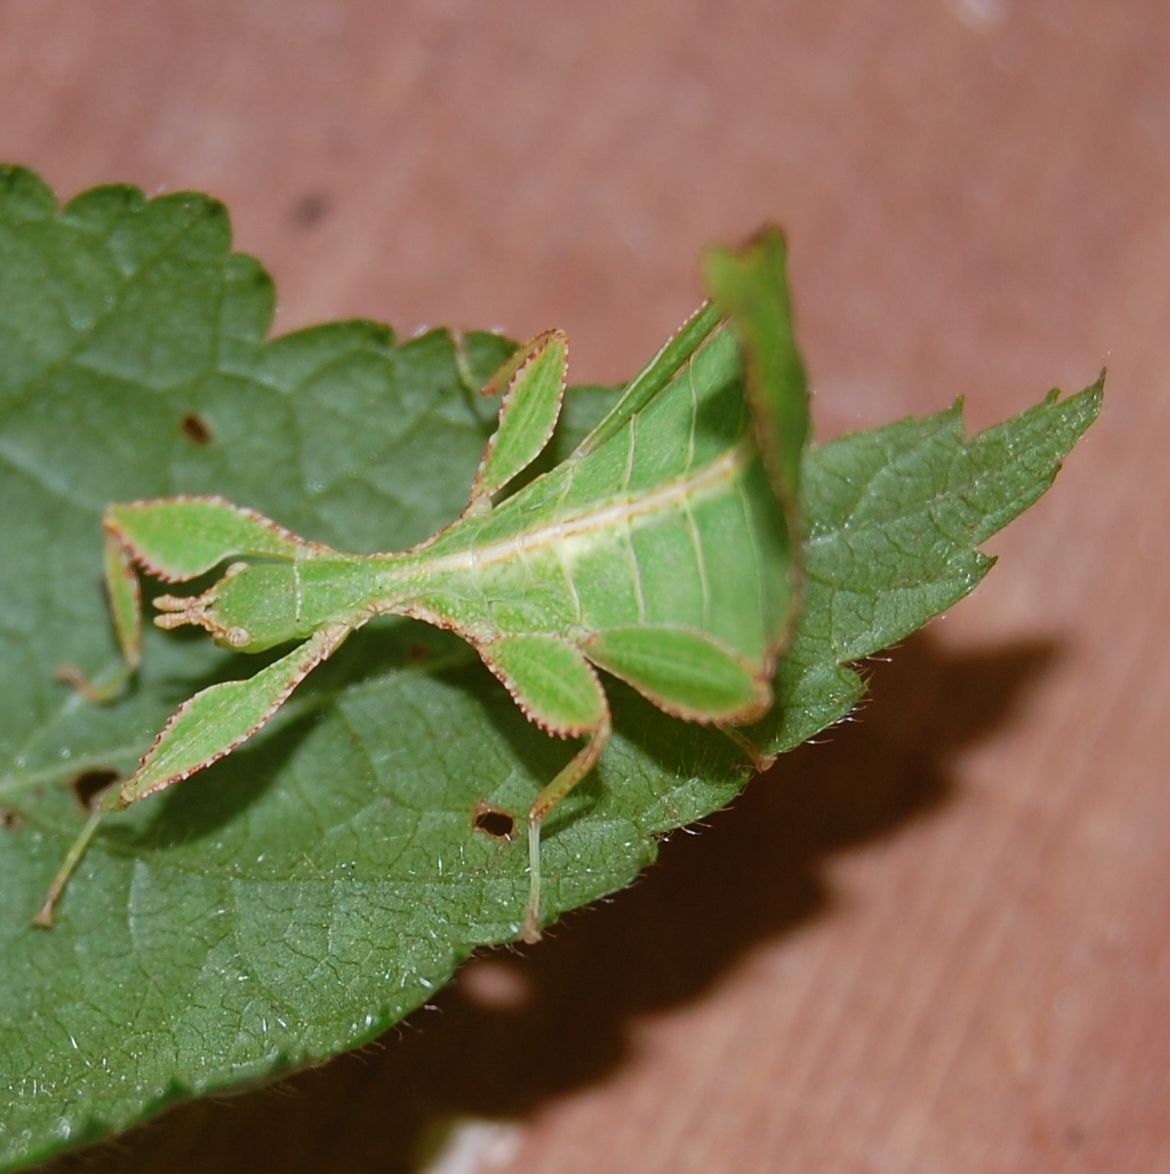 Leaf insects. Stick insect, Insects for kids, Stick insect facts